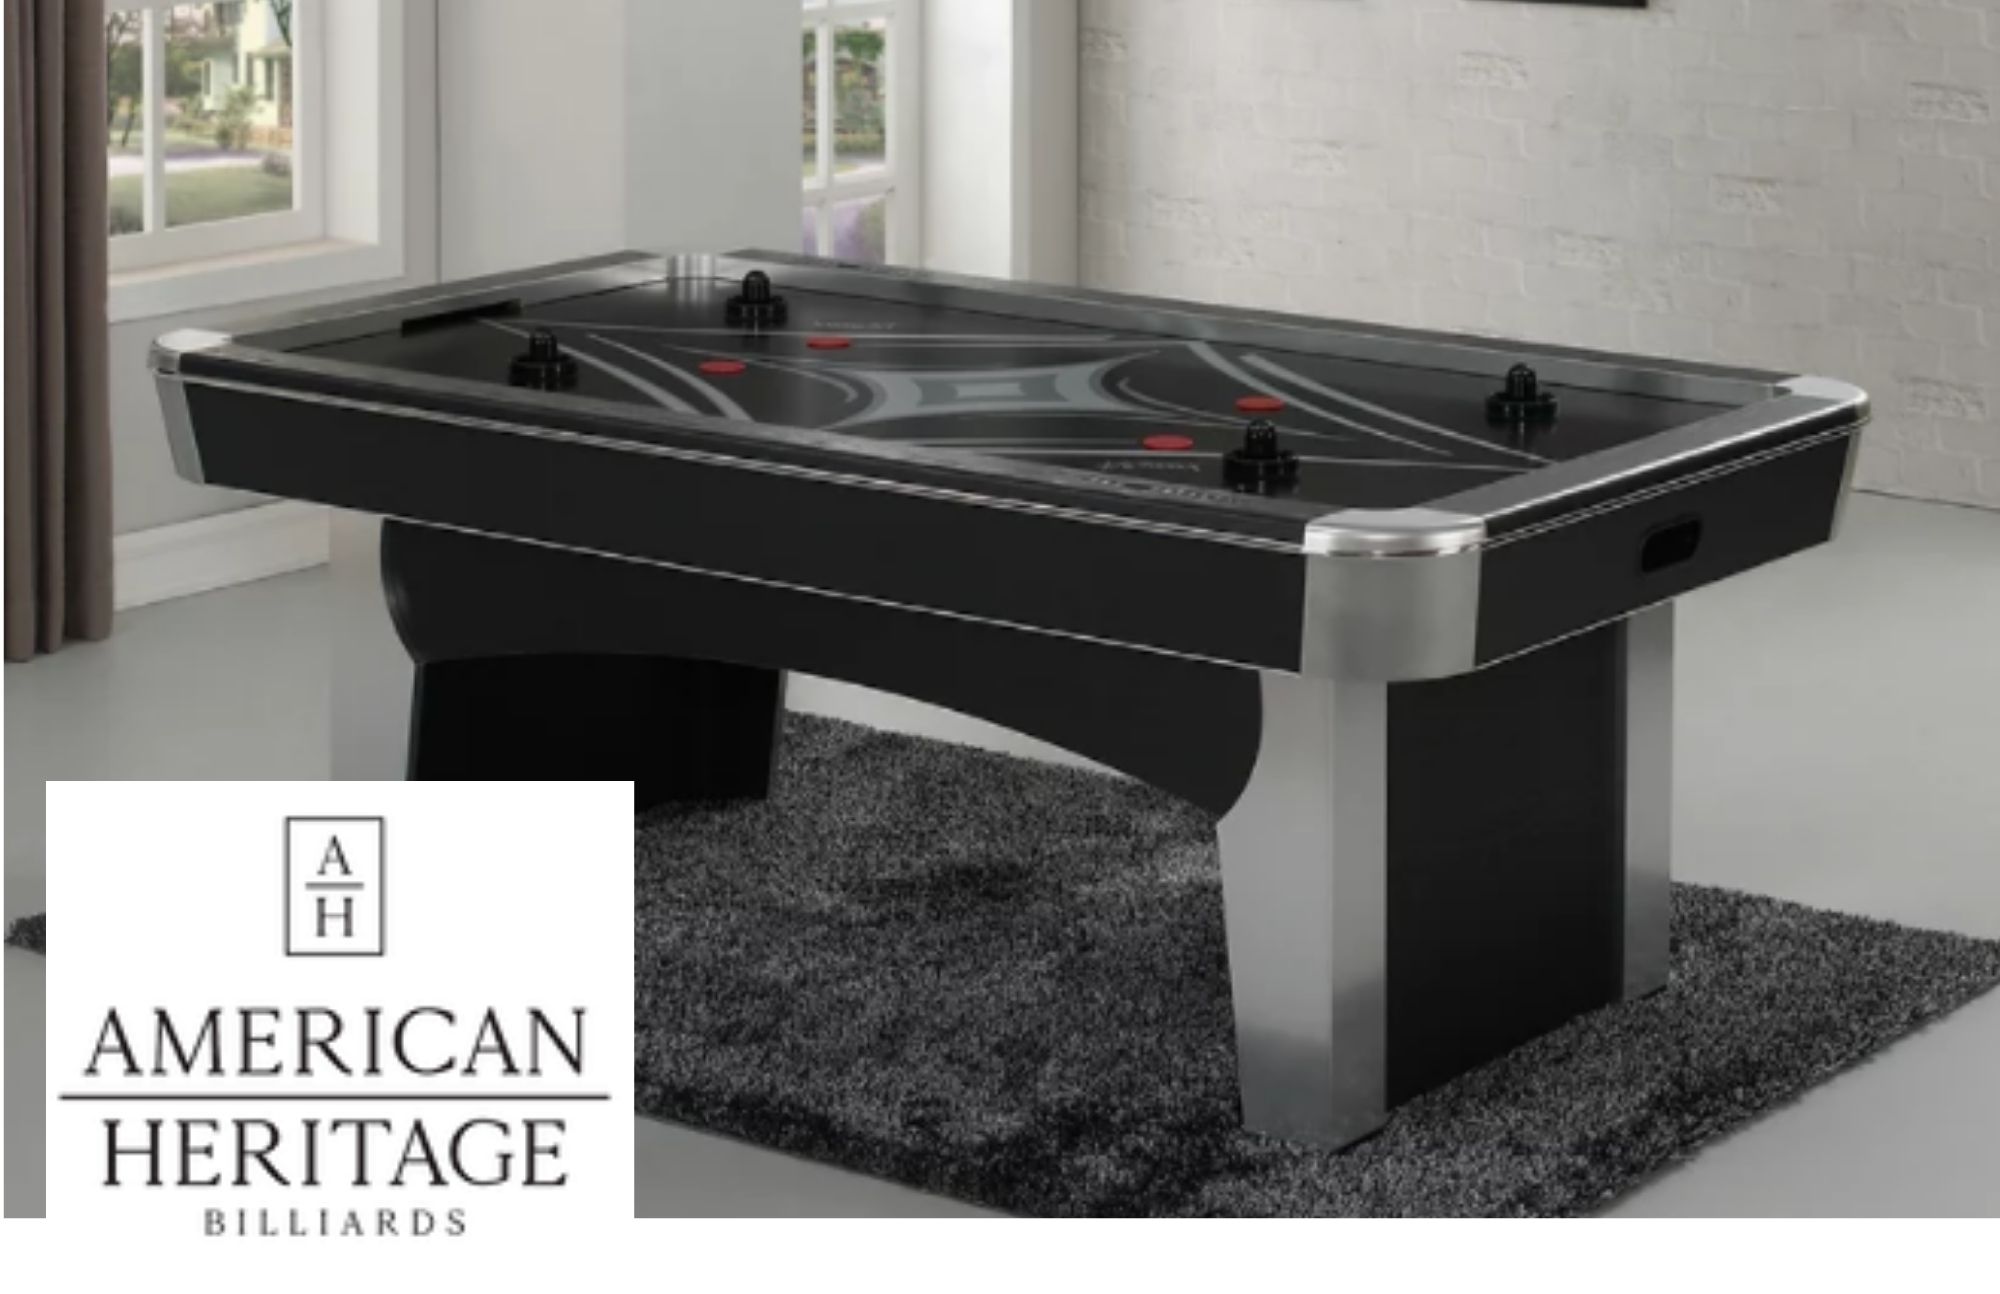 Inside the gaming room, Phoenix Air Hockey Table is set up under the gray blanket floor mat and American Heritage Logo on the lower-left corner